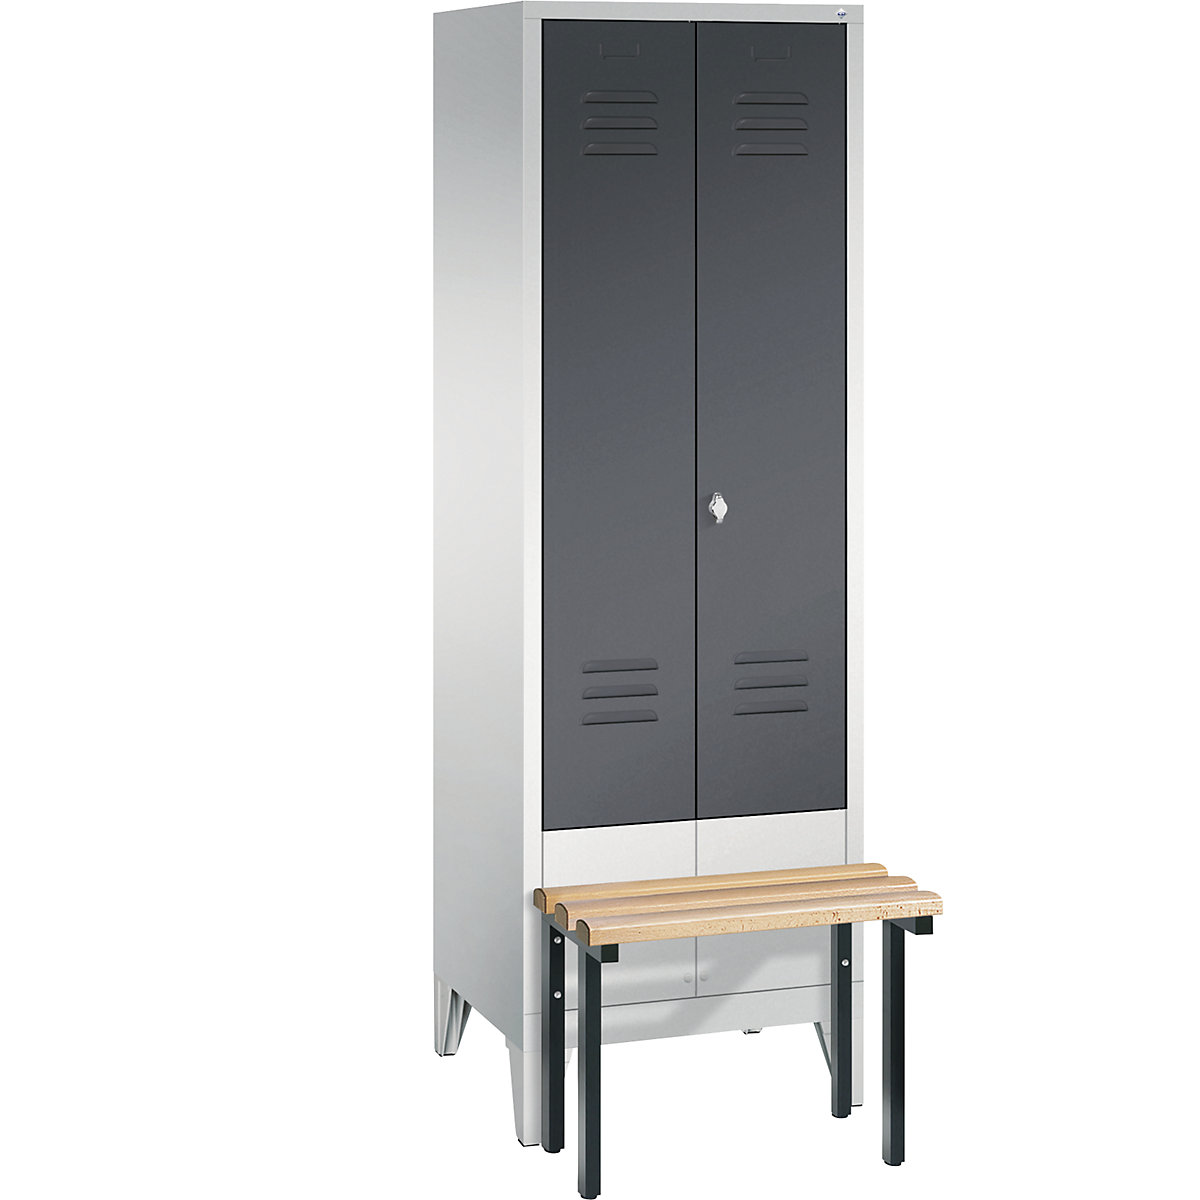 CLASSIC cloakroom locker with bench mounted at front, doors close in the middle – C+P